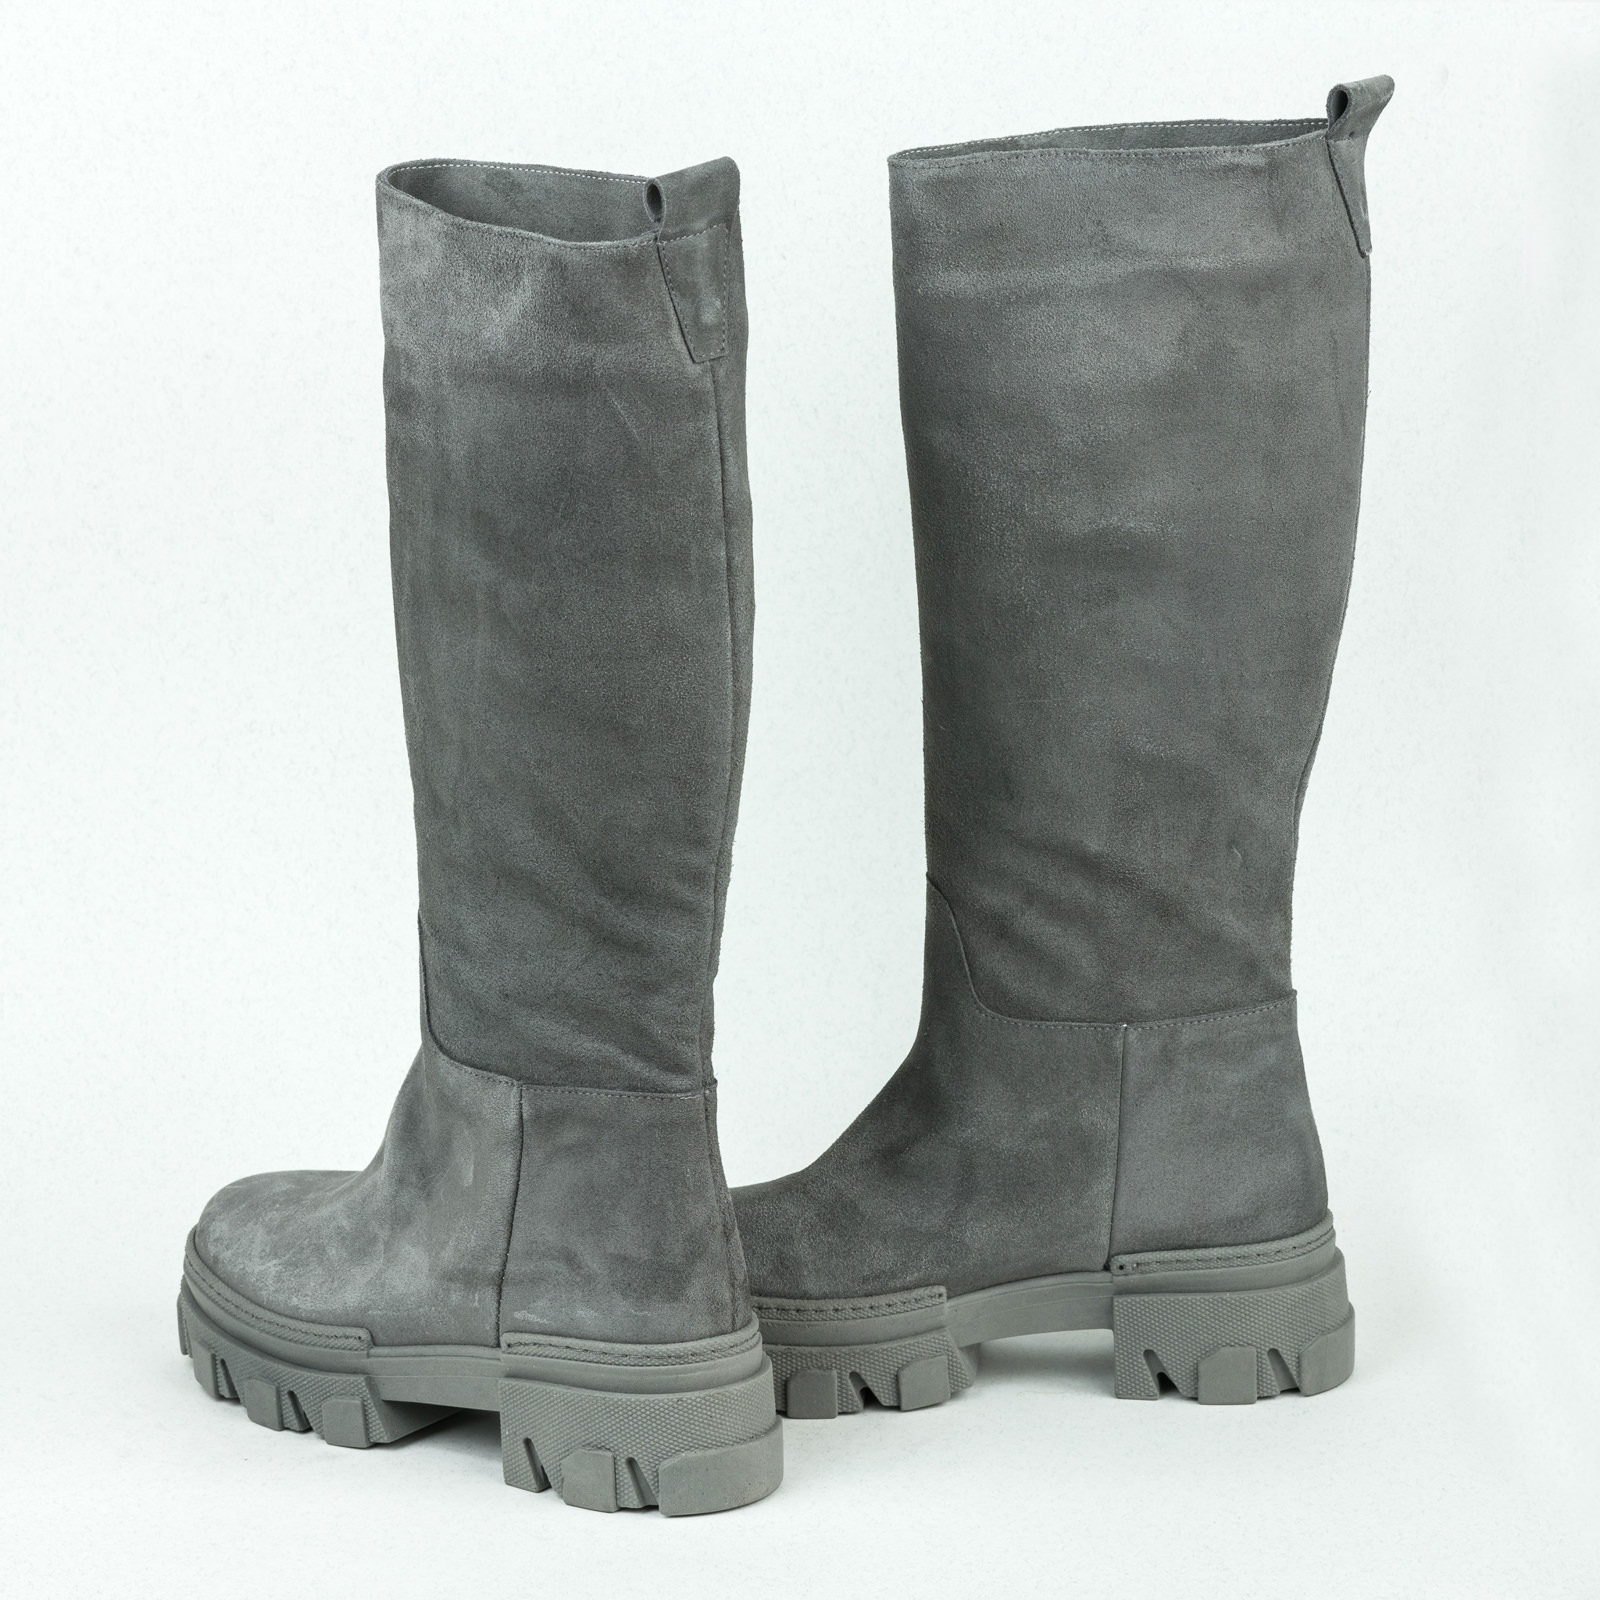 Leather WATERPROOF boots B127 - GREY